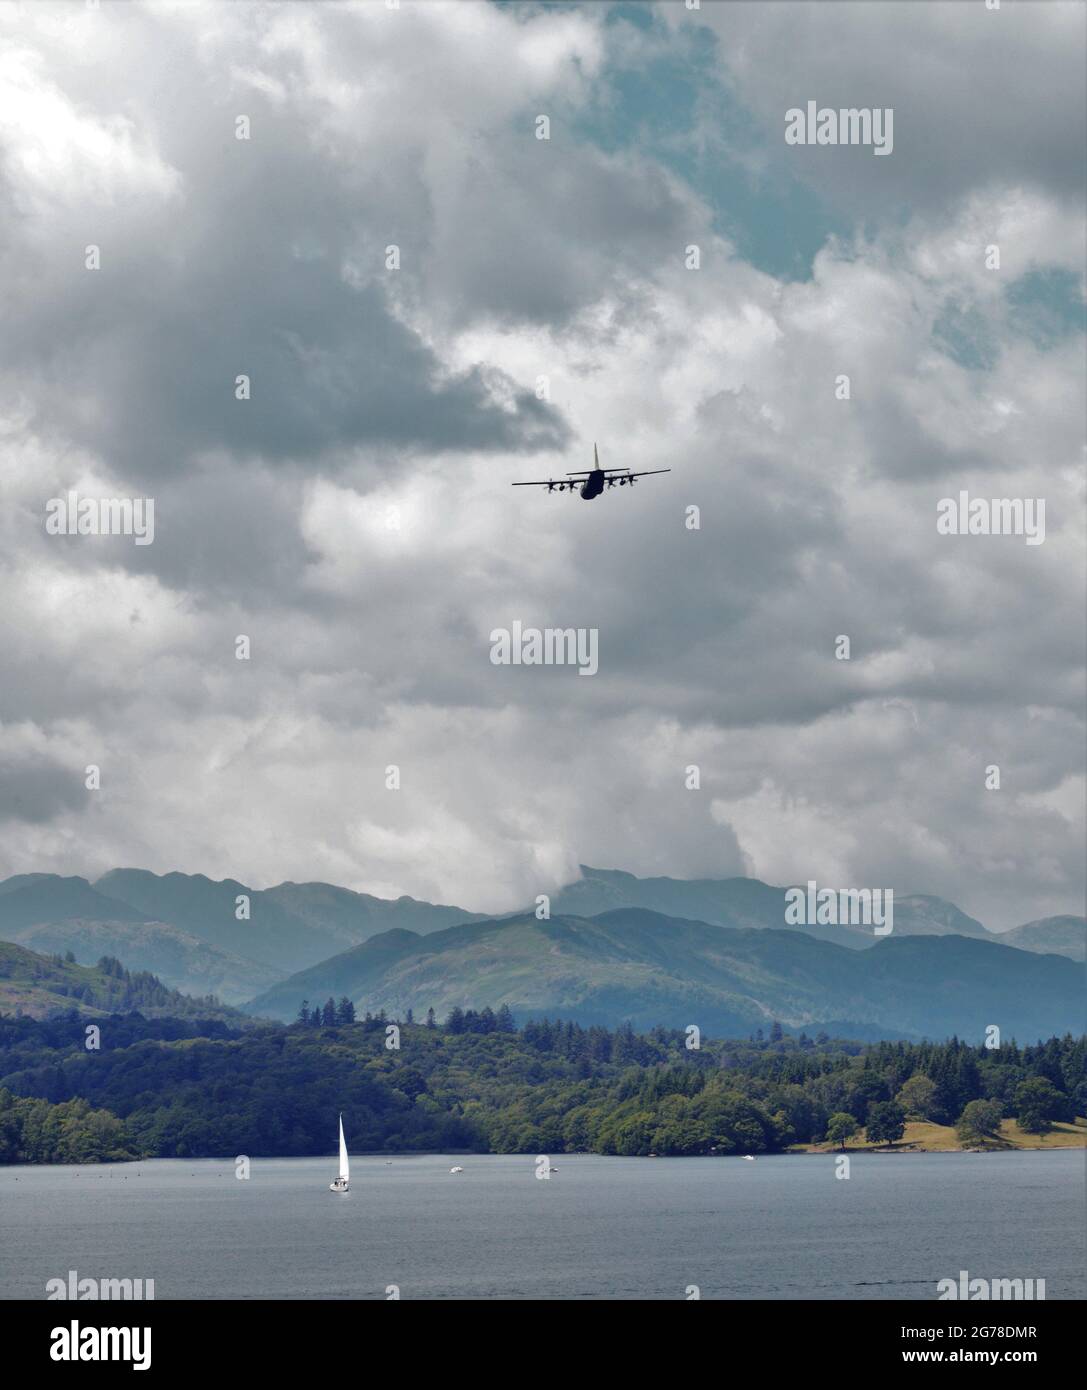 Stormy Weather Ahead. Yacht on Windermere and military transport aircraft head into stormy weather. Stock Photo